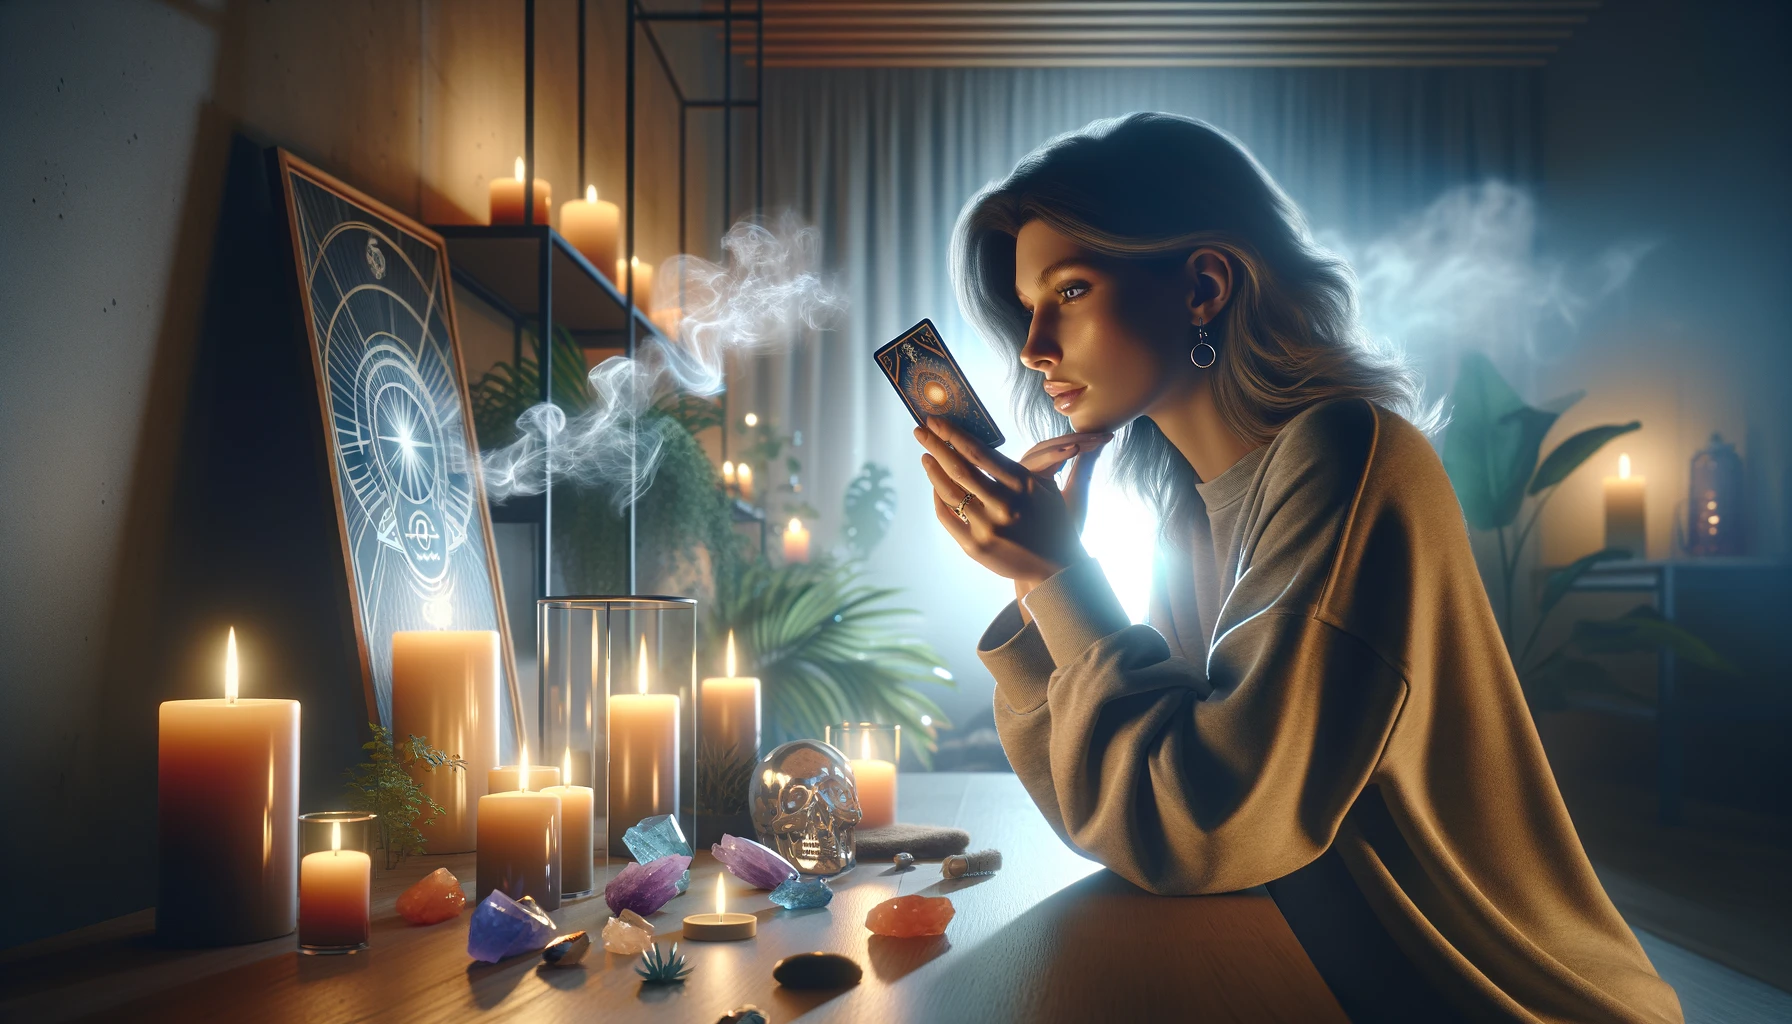 A highly realistic 169 image showcasing a person in a modern serene bohemian home setting The person is deeply engaged in introspection while holding a tarot card with their face softl